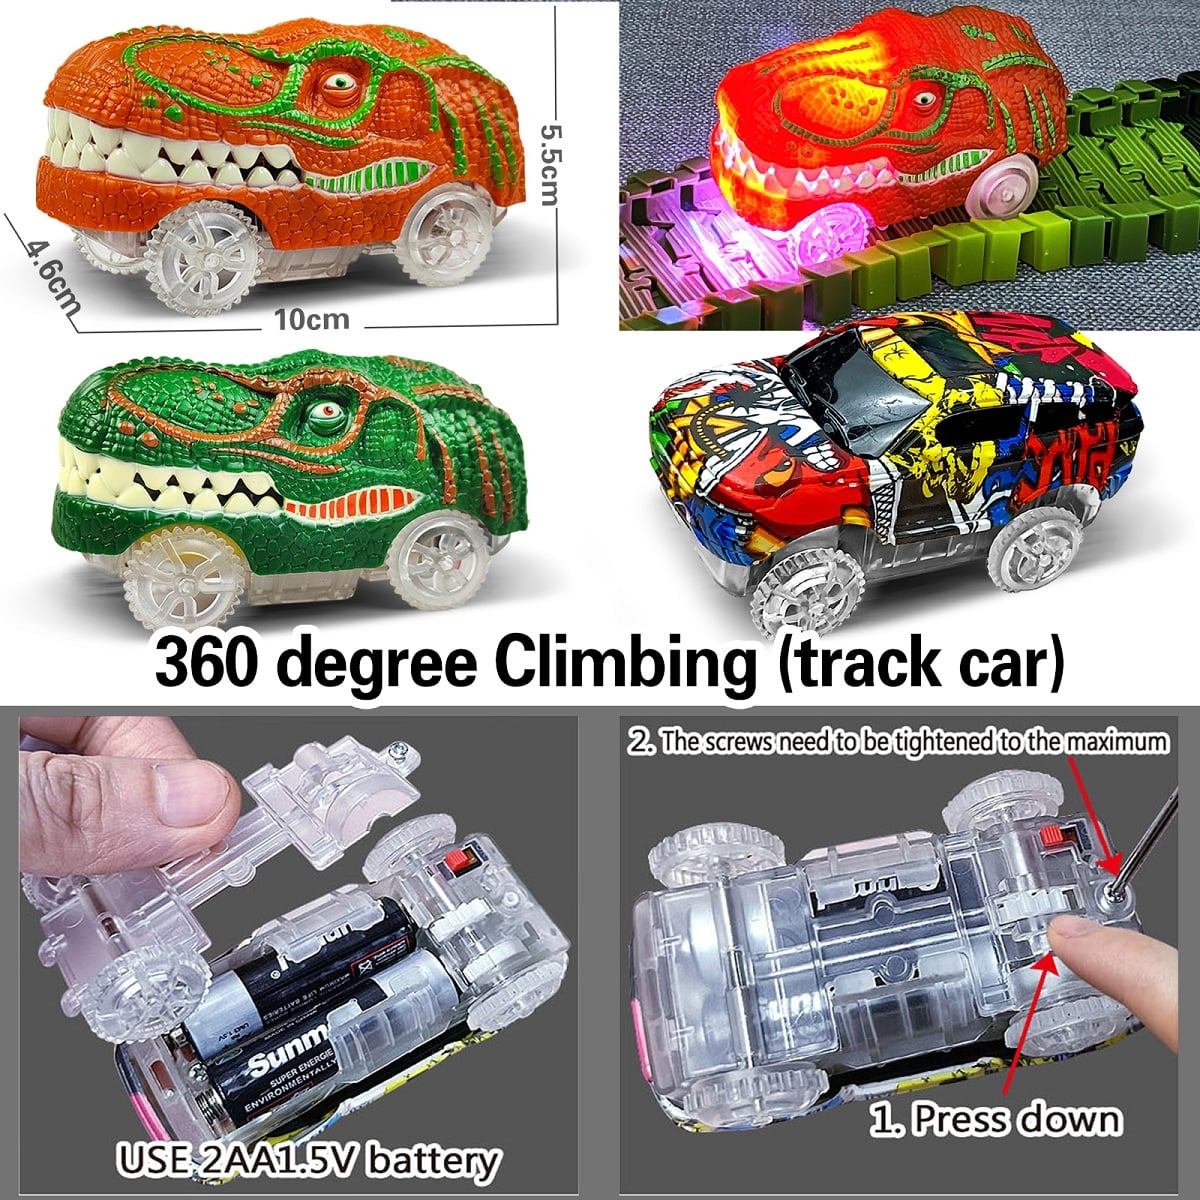 The Ultimate Dino Cars Track Set™